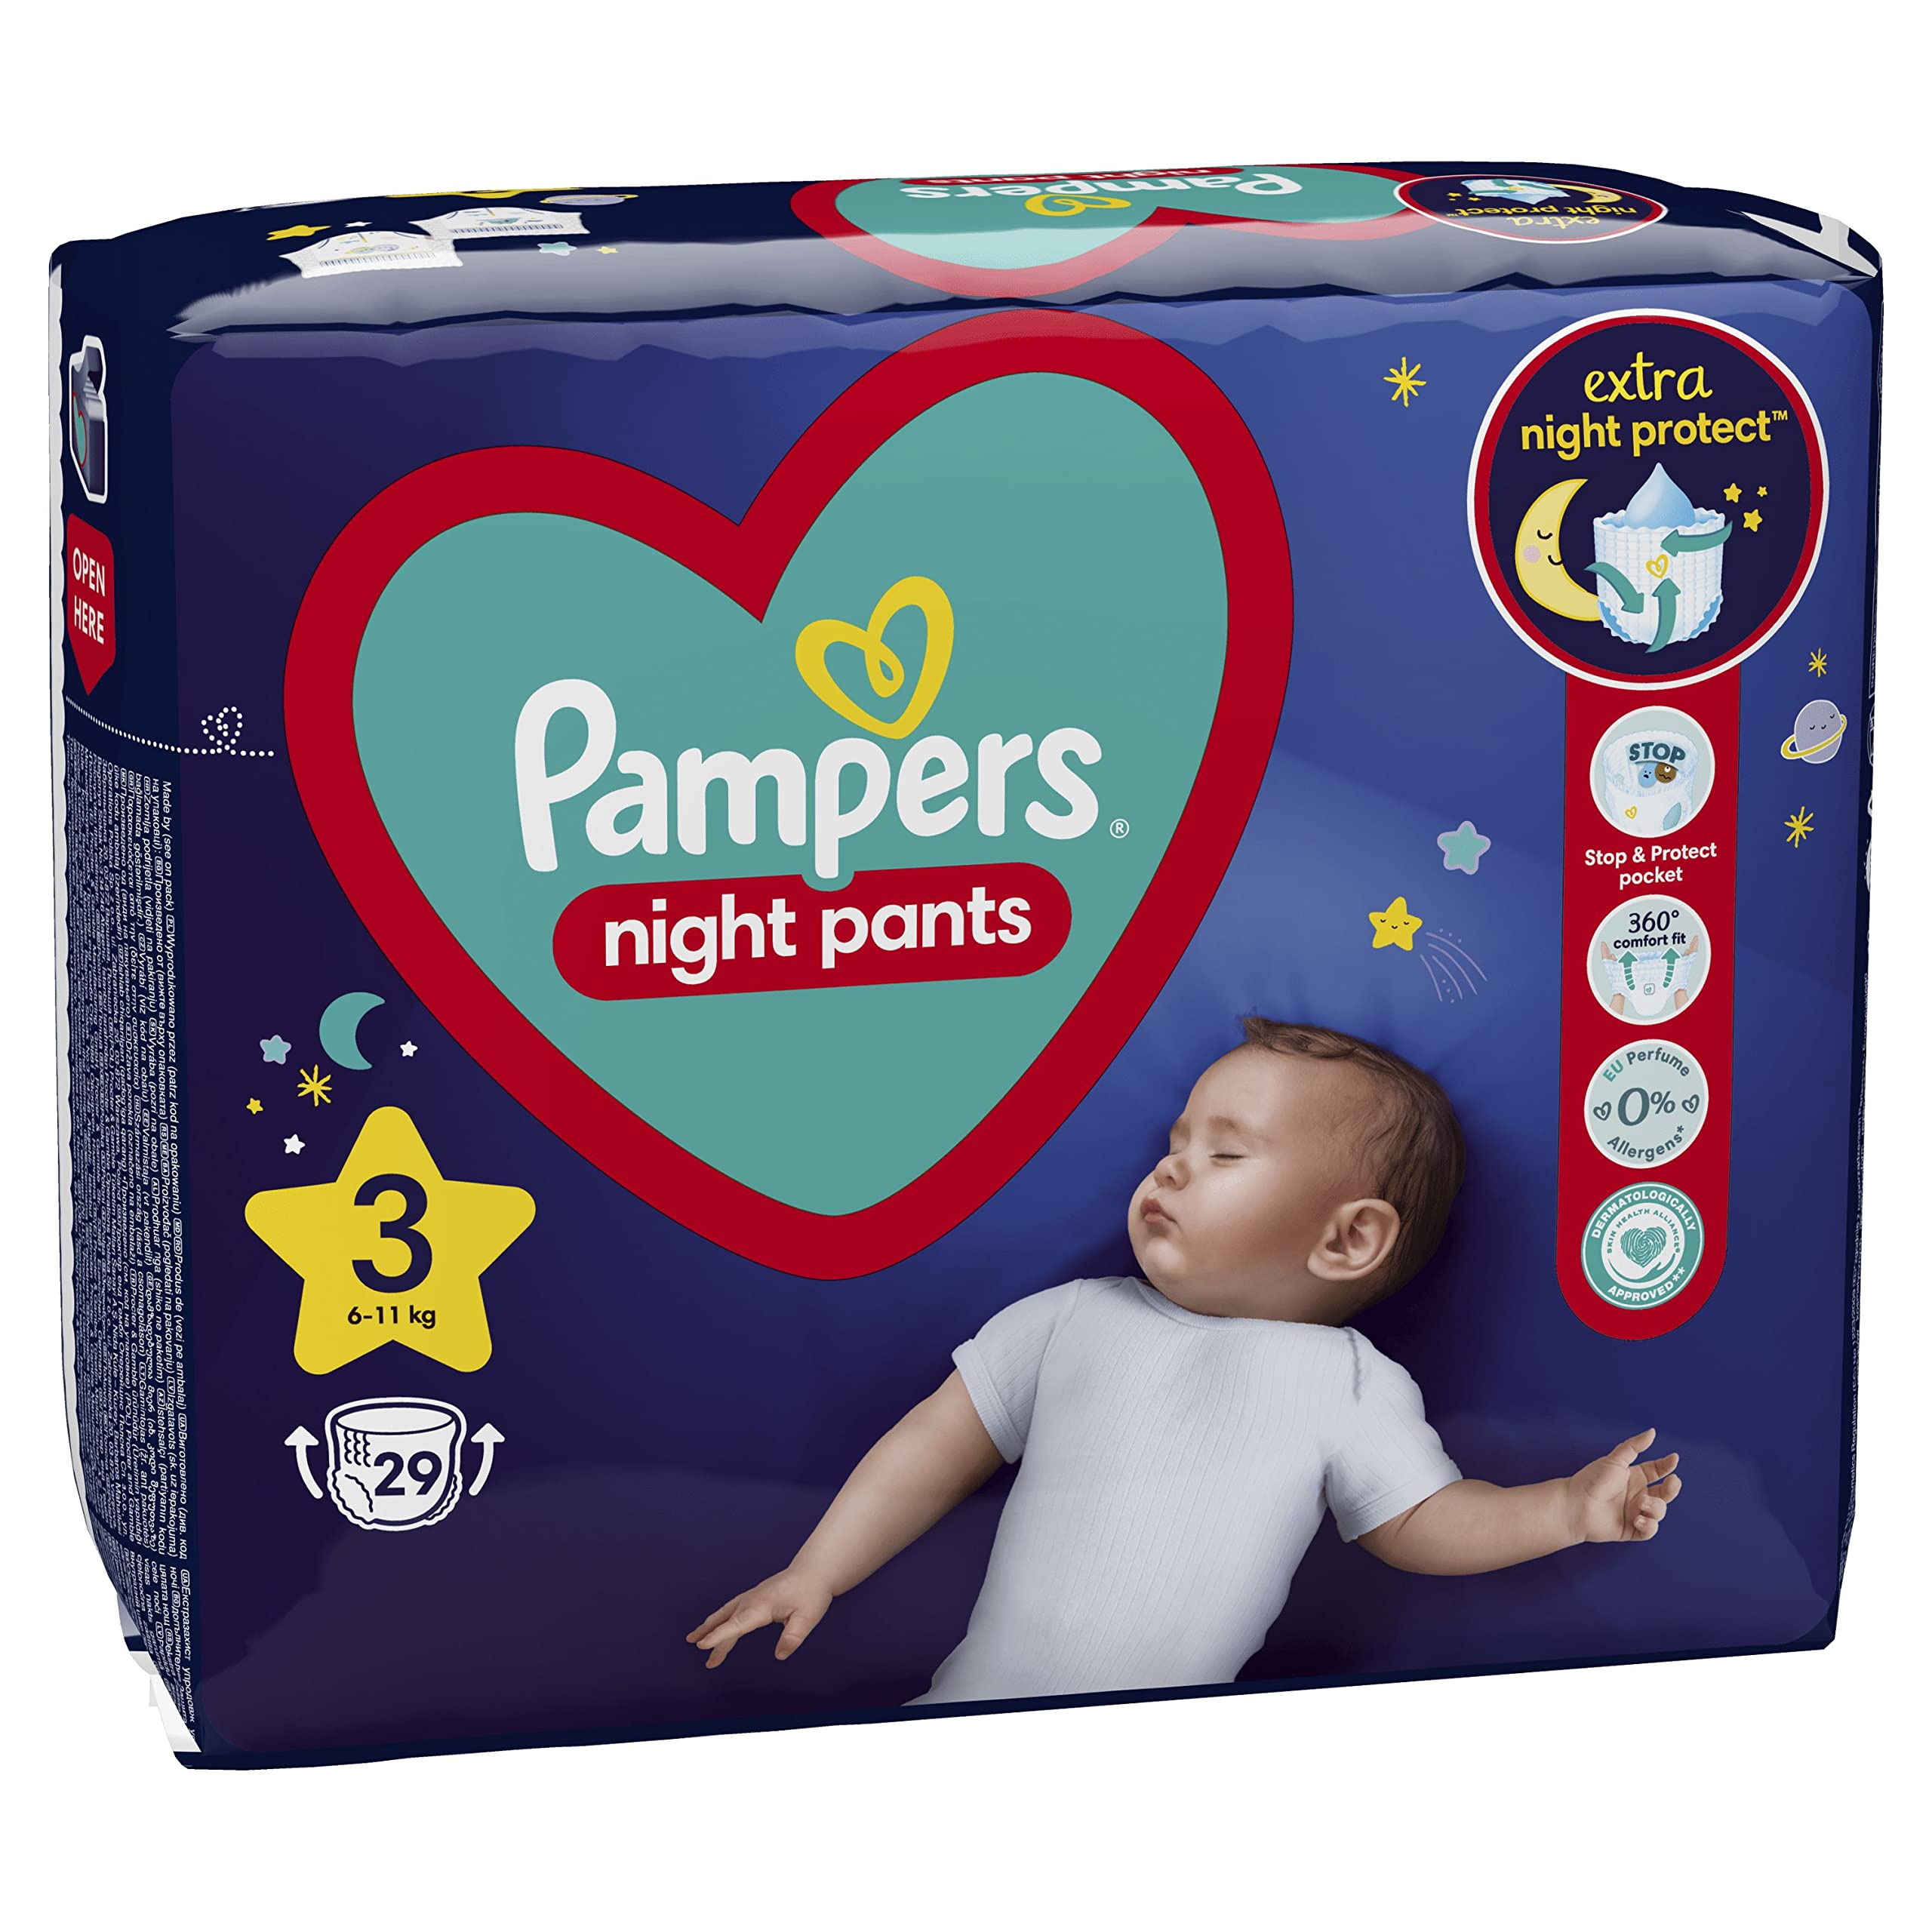 pampers new baby 3 6 kg